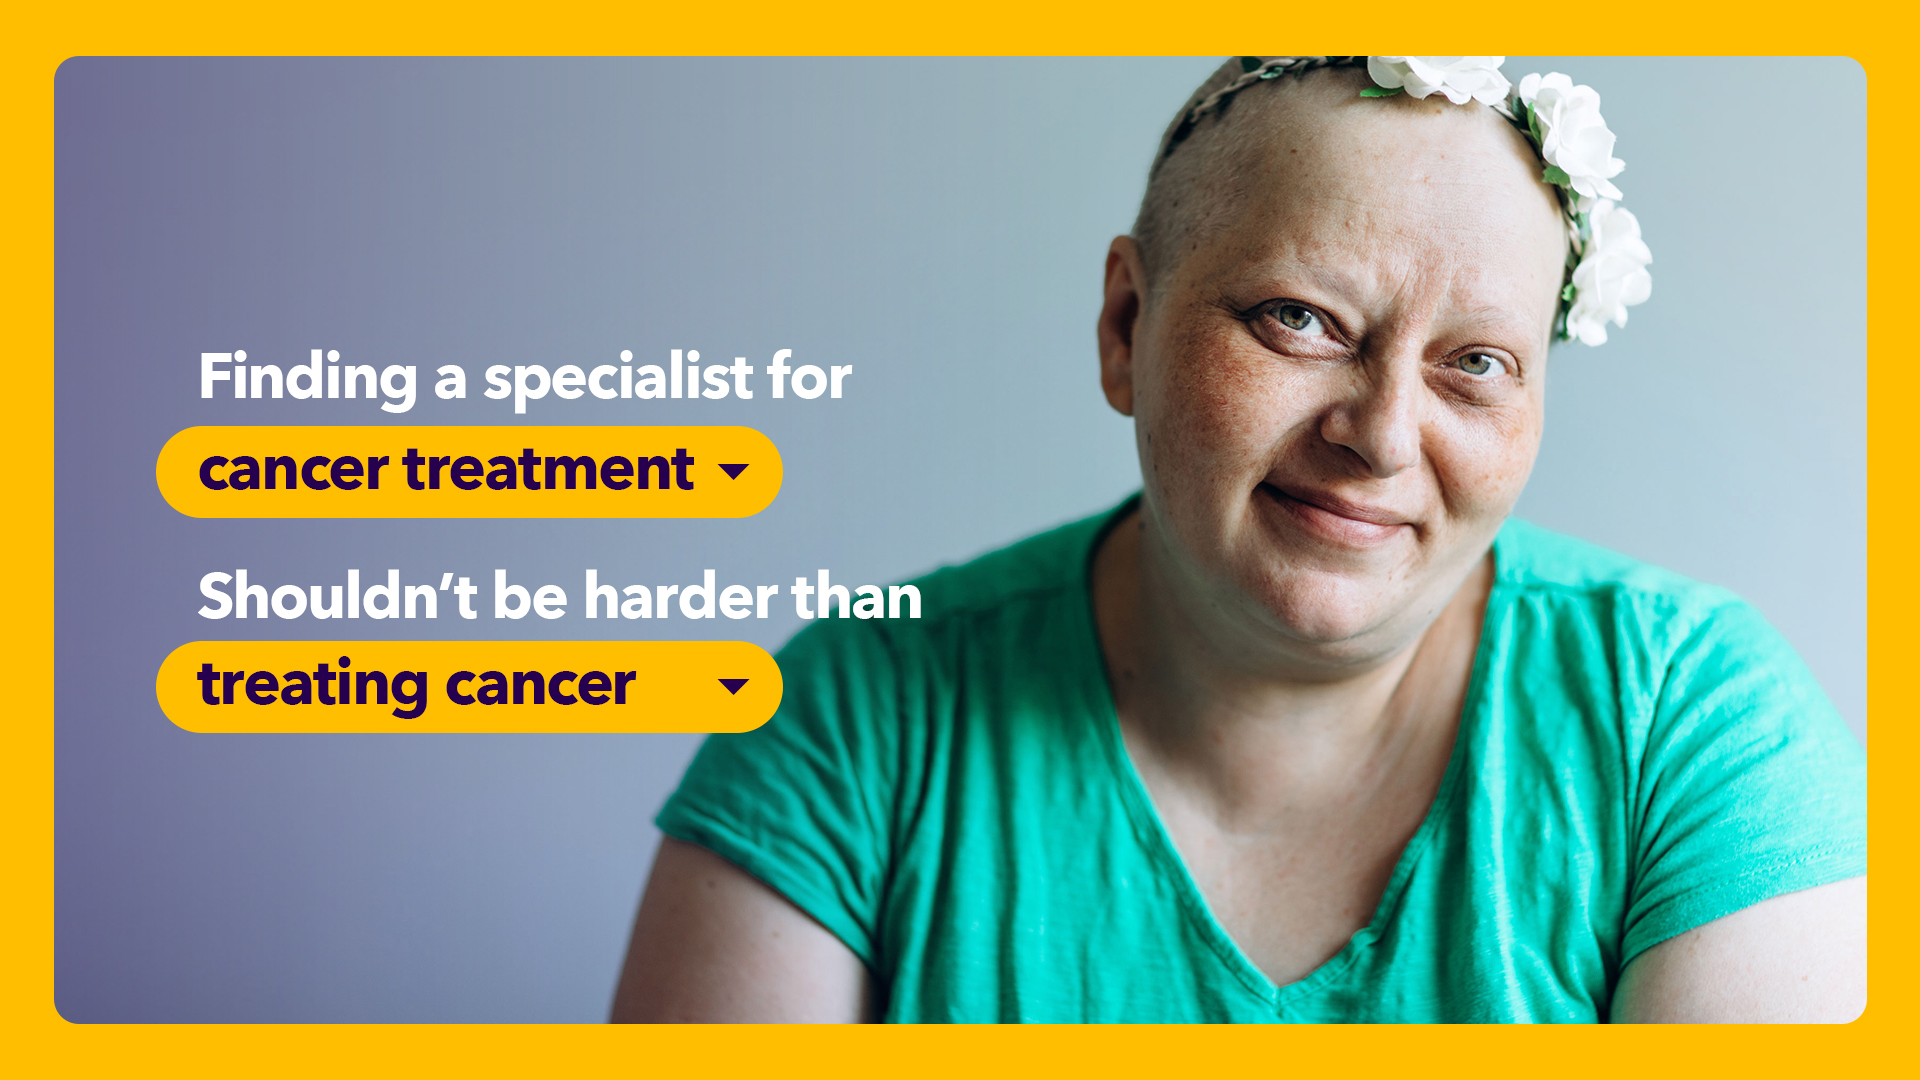 Finding a specialist for cancer treatment shouldn't be harder than treating cancer.